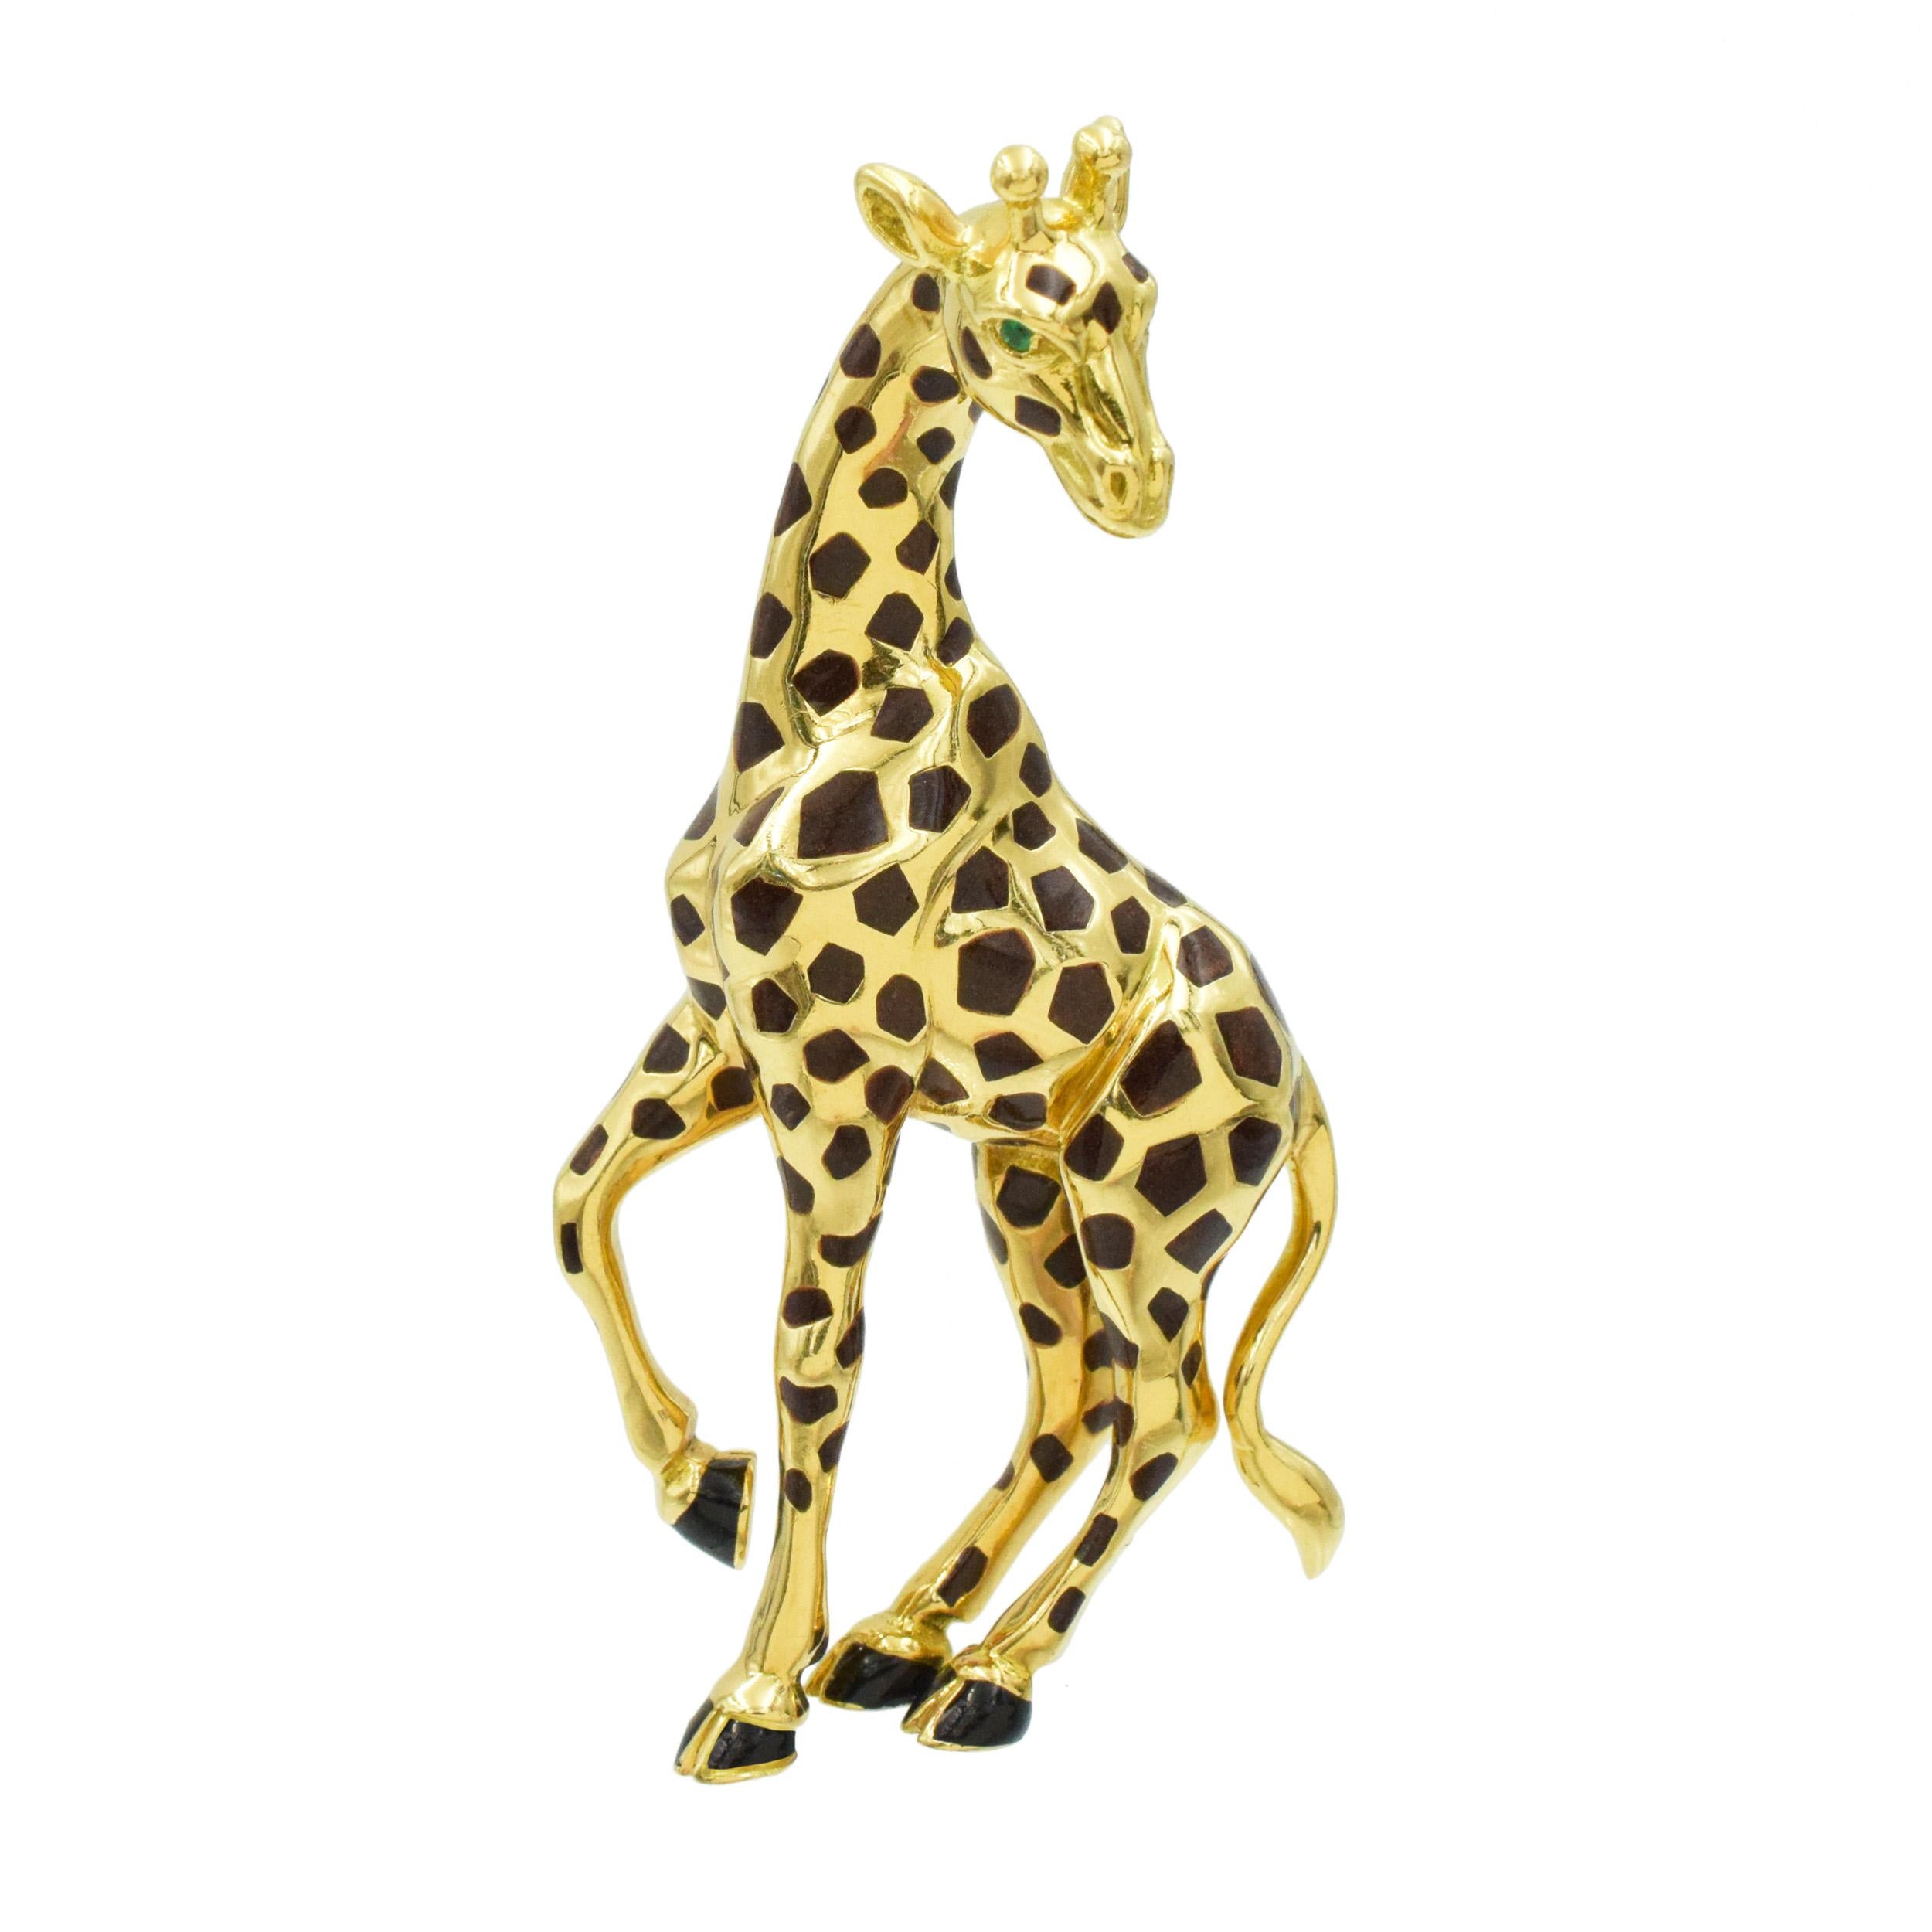 Cartier Giraffe brooch in 18k yellow gold, decorated with emeralds and enamel. 
The giraffe is enameled with brown translucent enamel spots and black enamel hooves. Both eyes are set with a round faceted emeralds. Equipped with double pin and